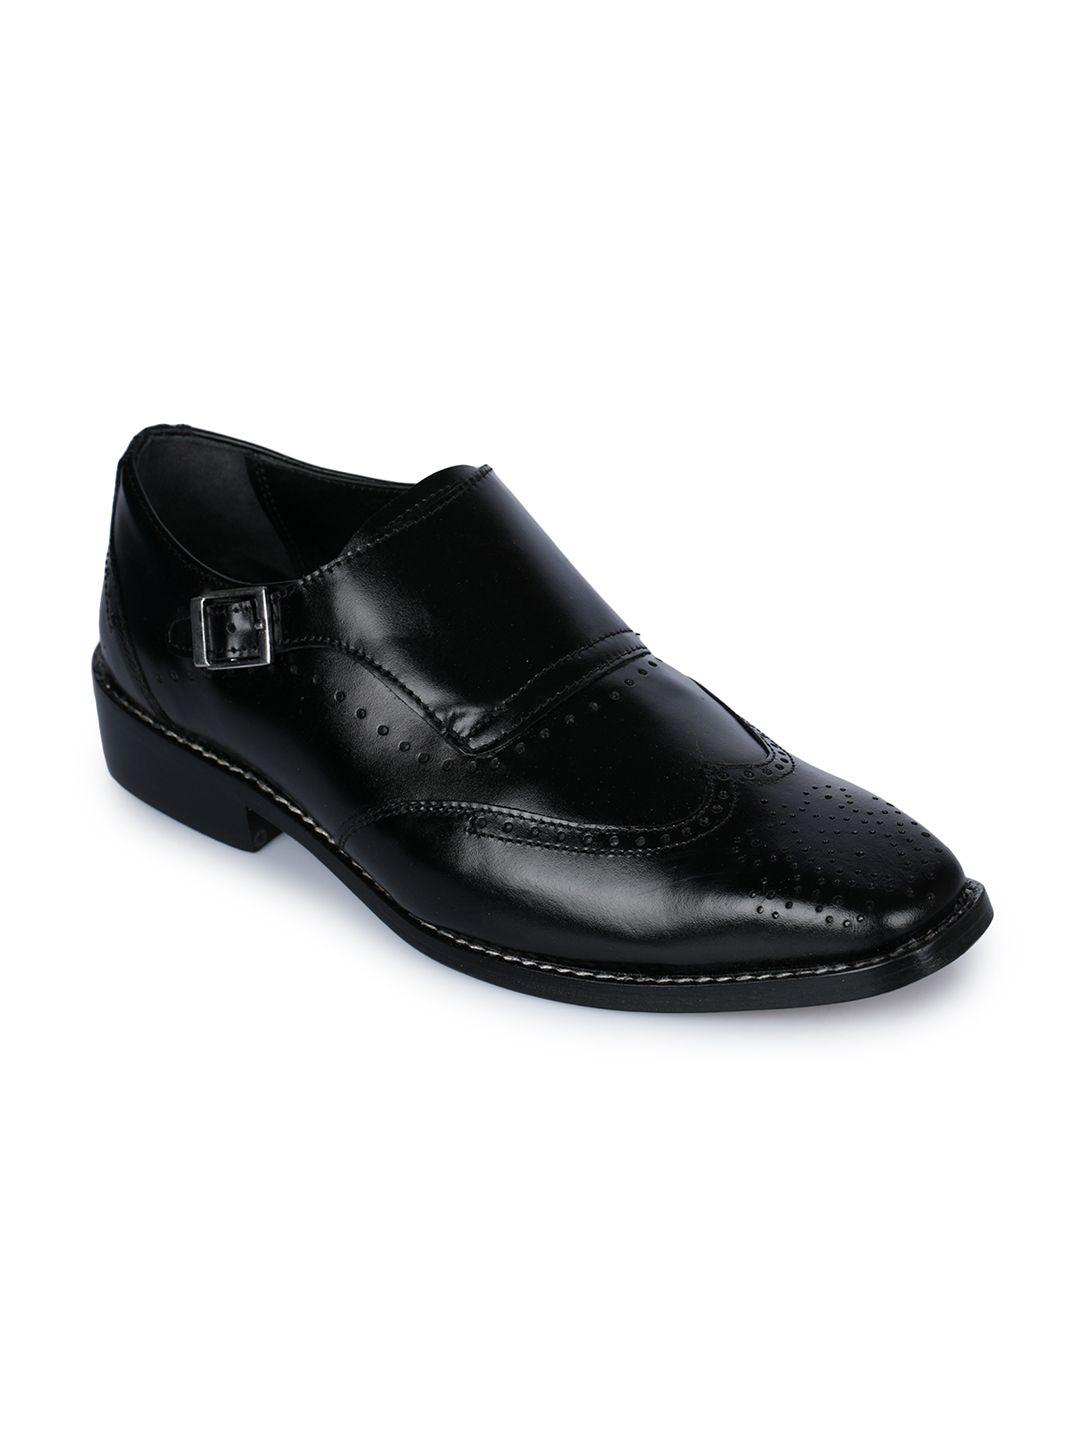 liberty men black solid leather formal monk shoes